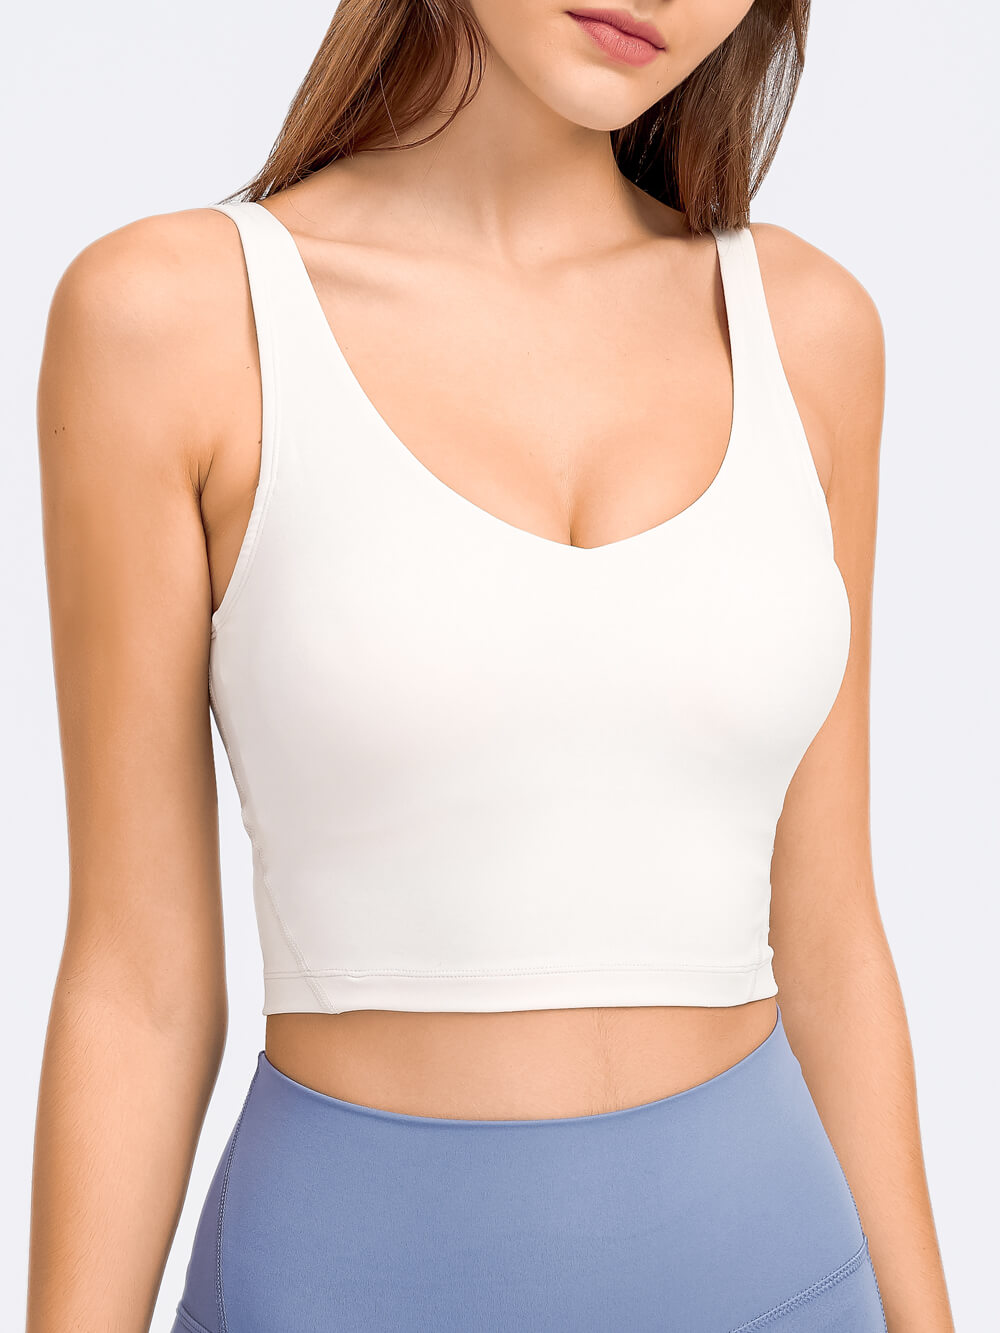 Nepoagym PASSION Women Crop Tank with Shelf Built In Bra Workout